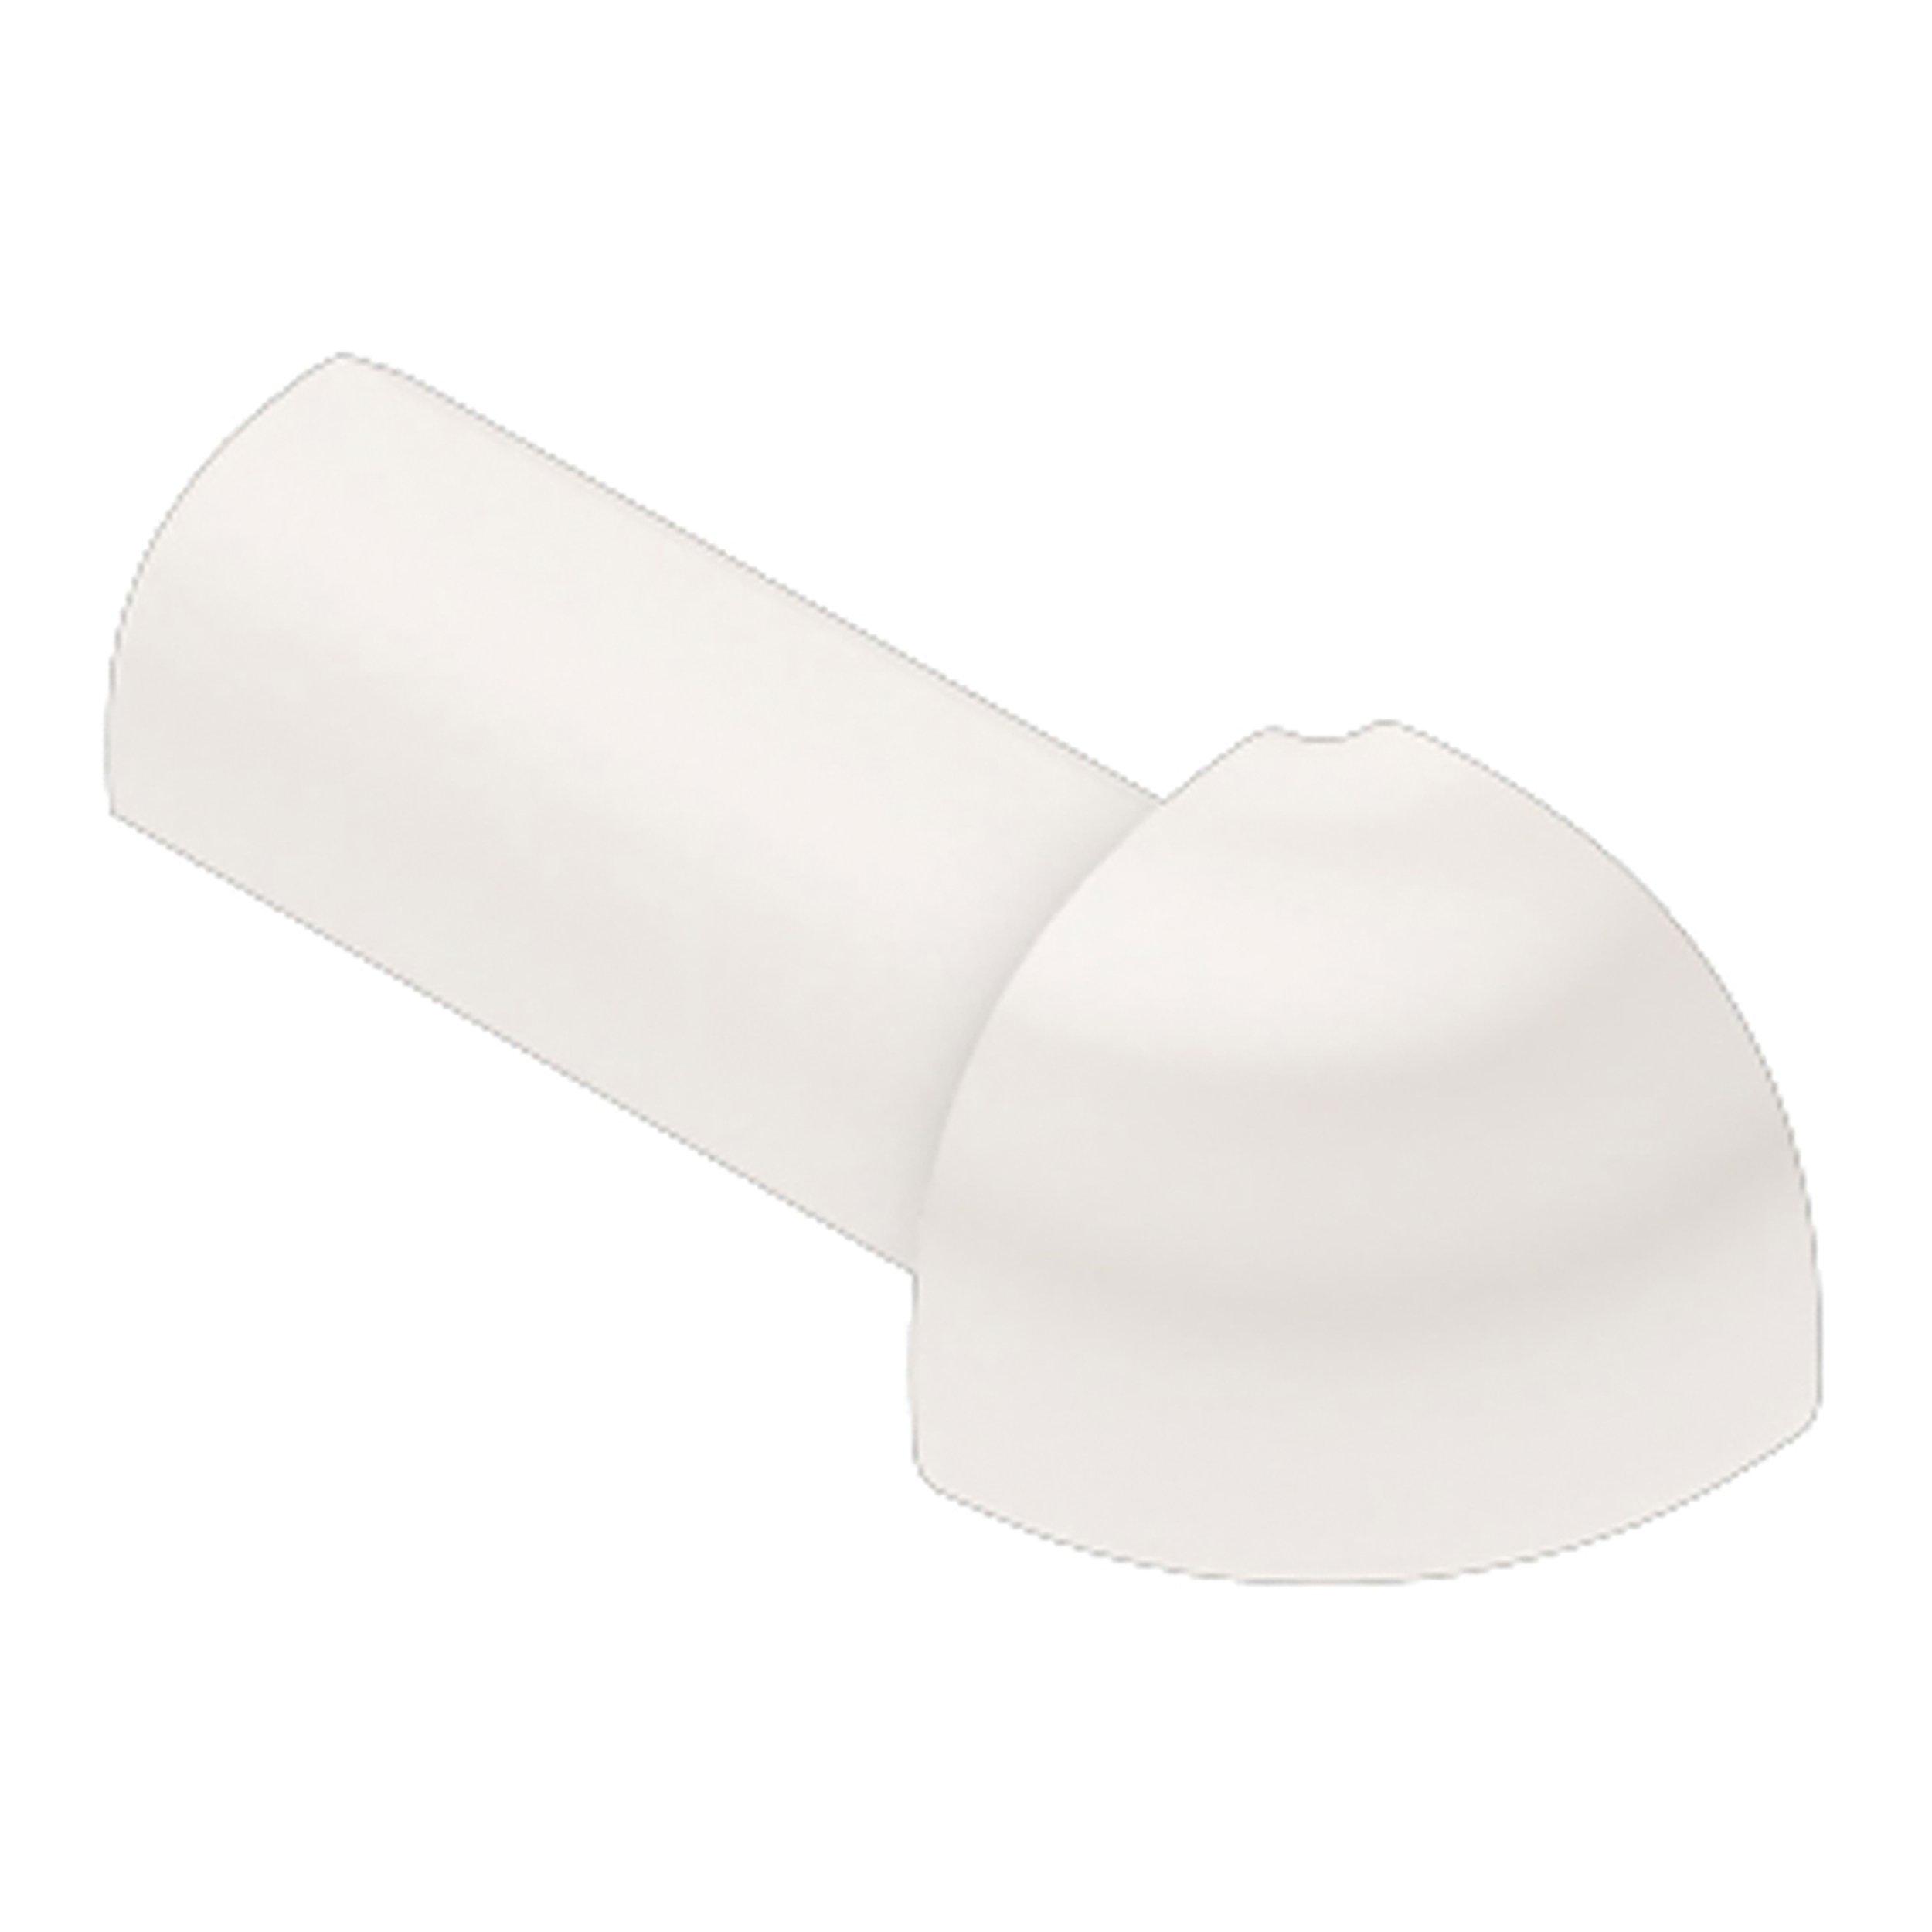 Schluter Rondec Out Corner 7/16 in. PVC White